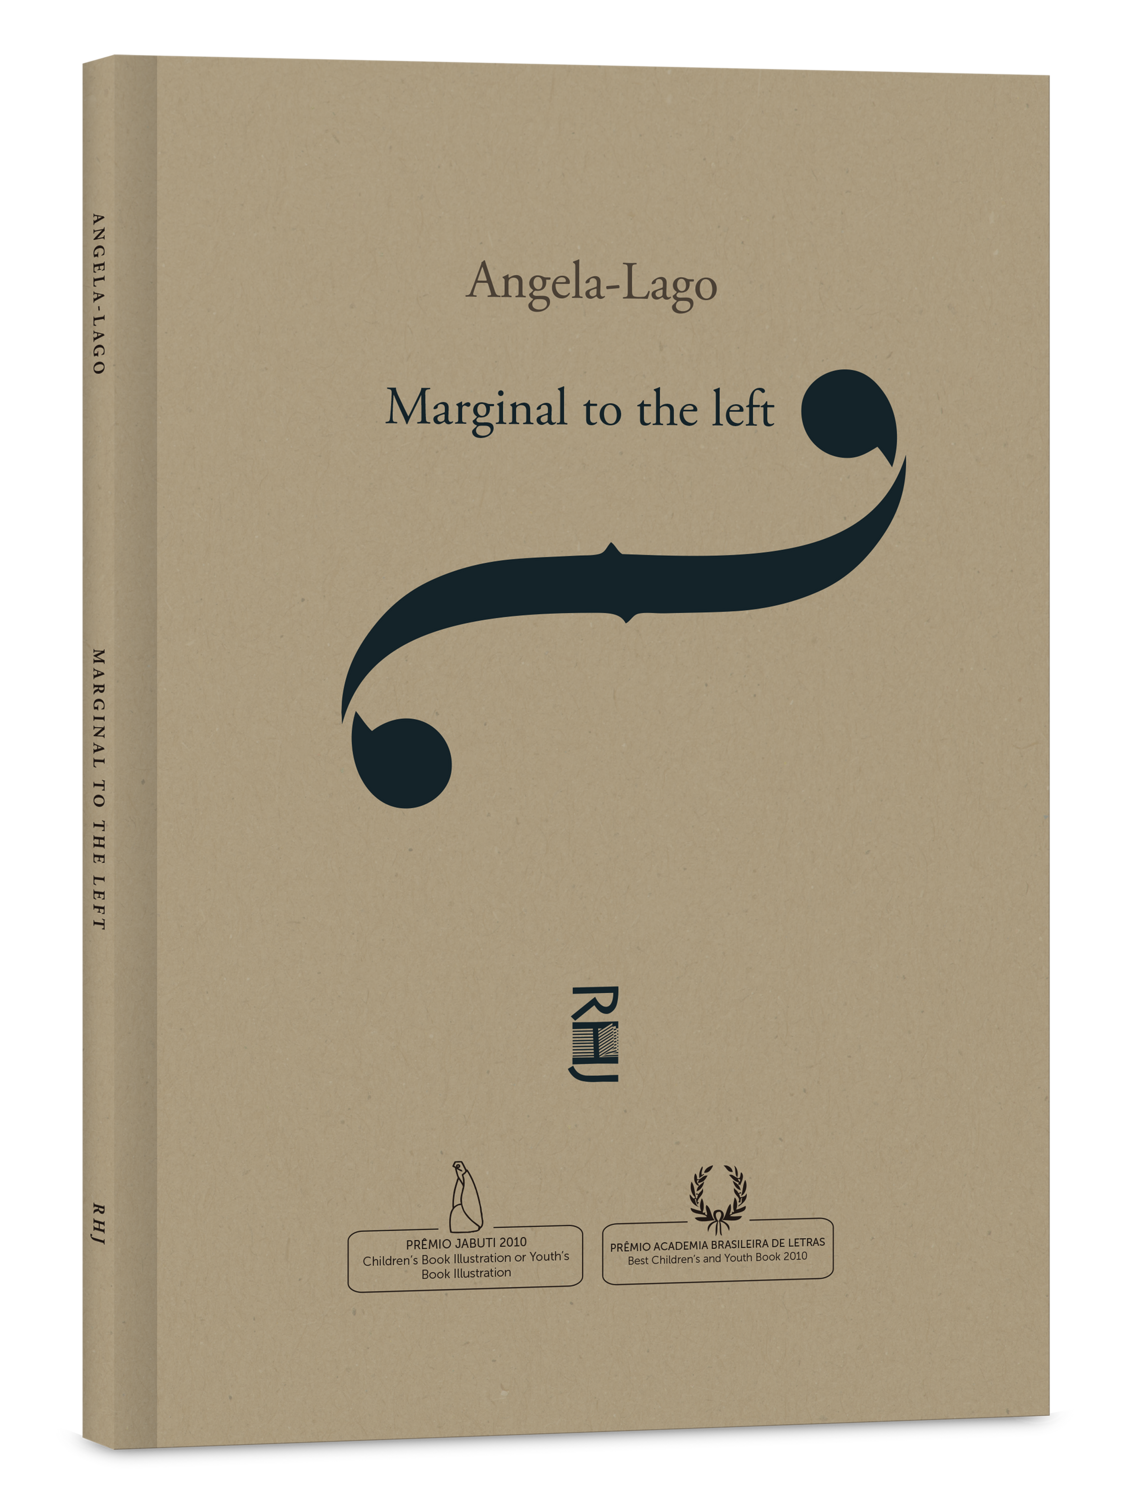 Marginal to the left